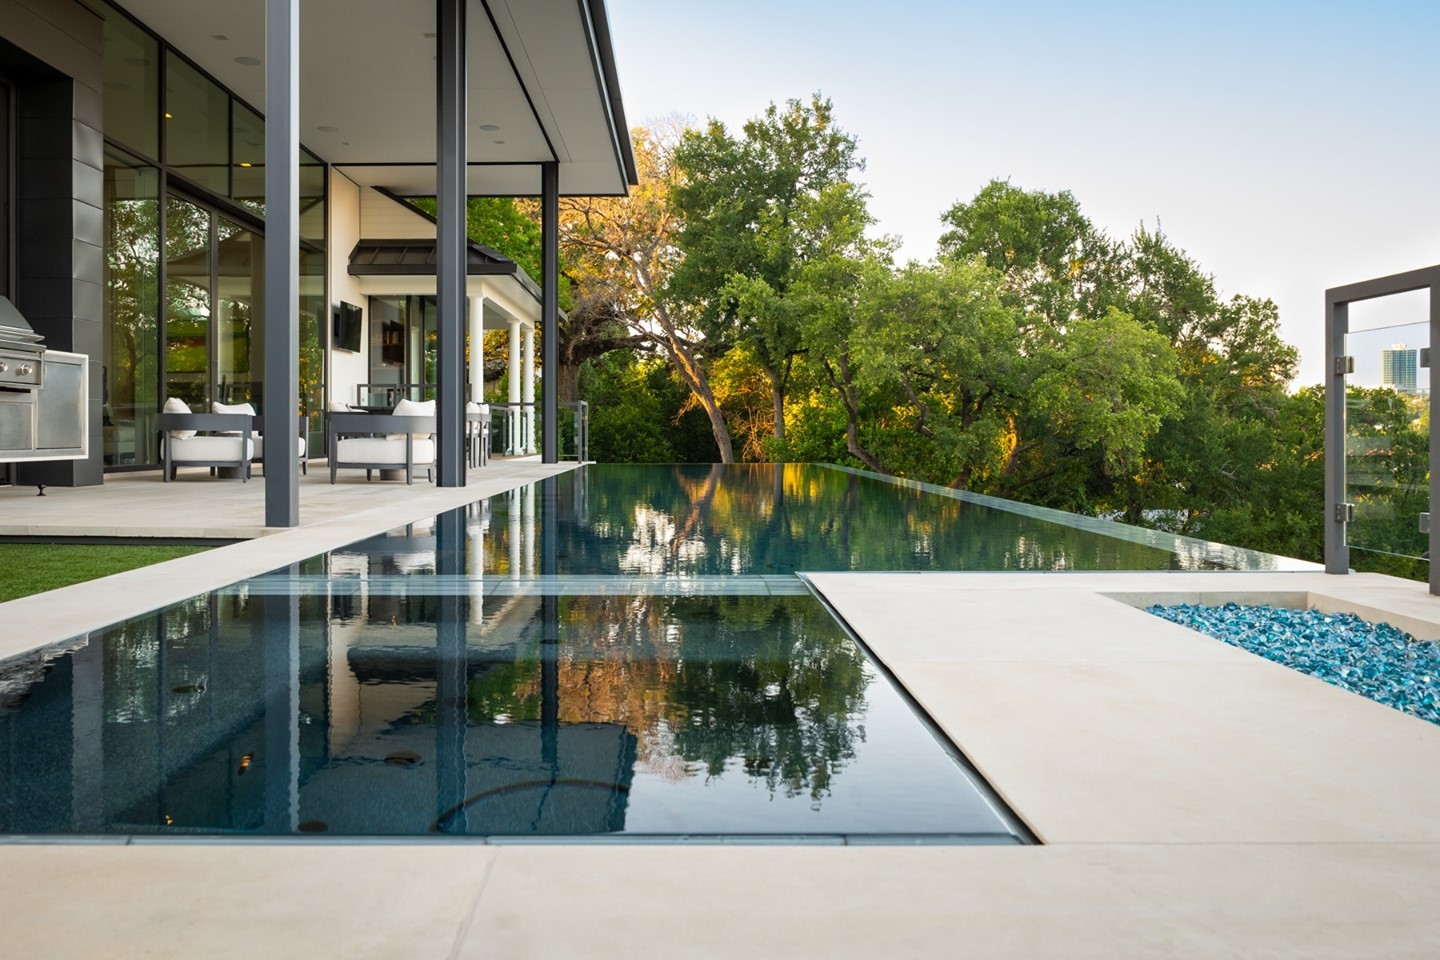 This backyard oasis is always ready for a poolside party.